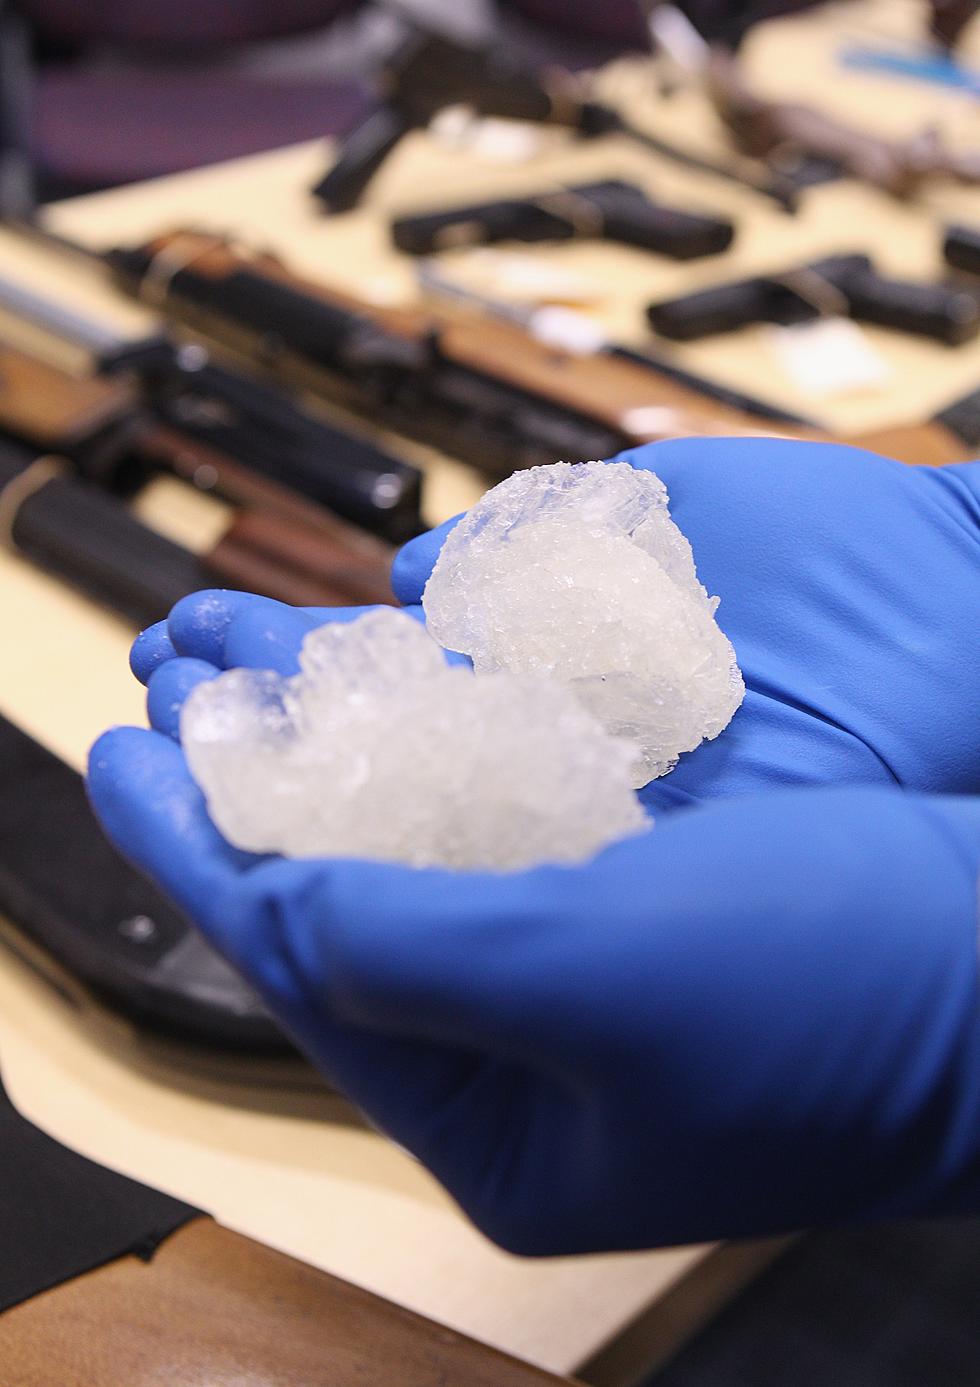 Eleven Face Federal Meth Charges